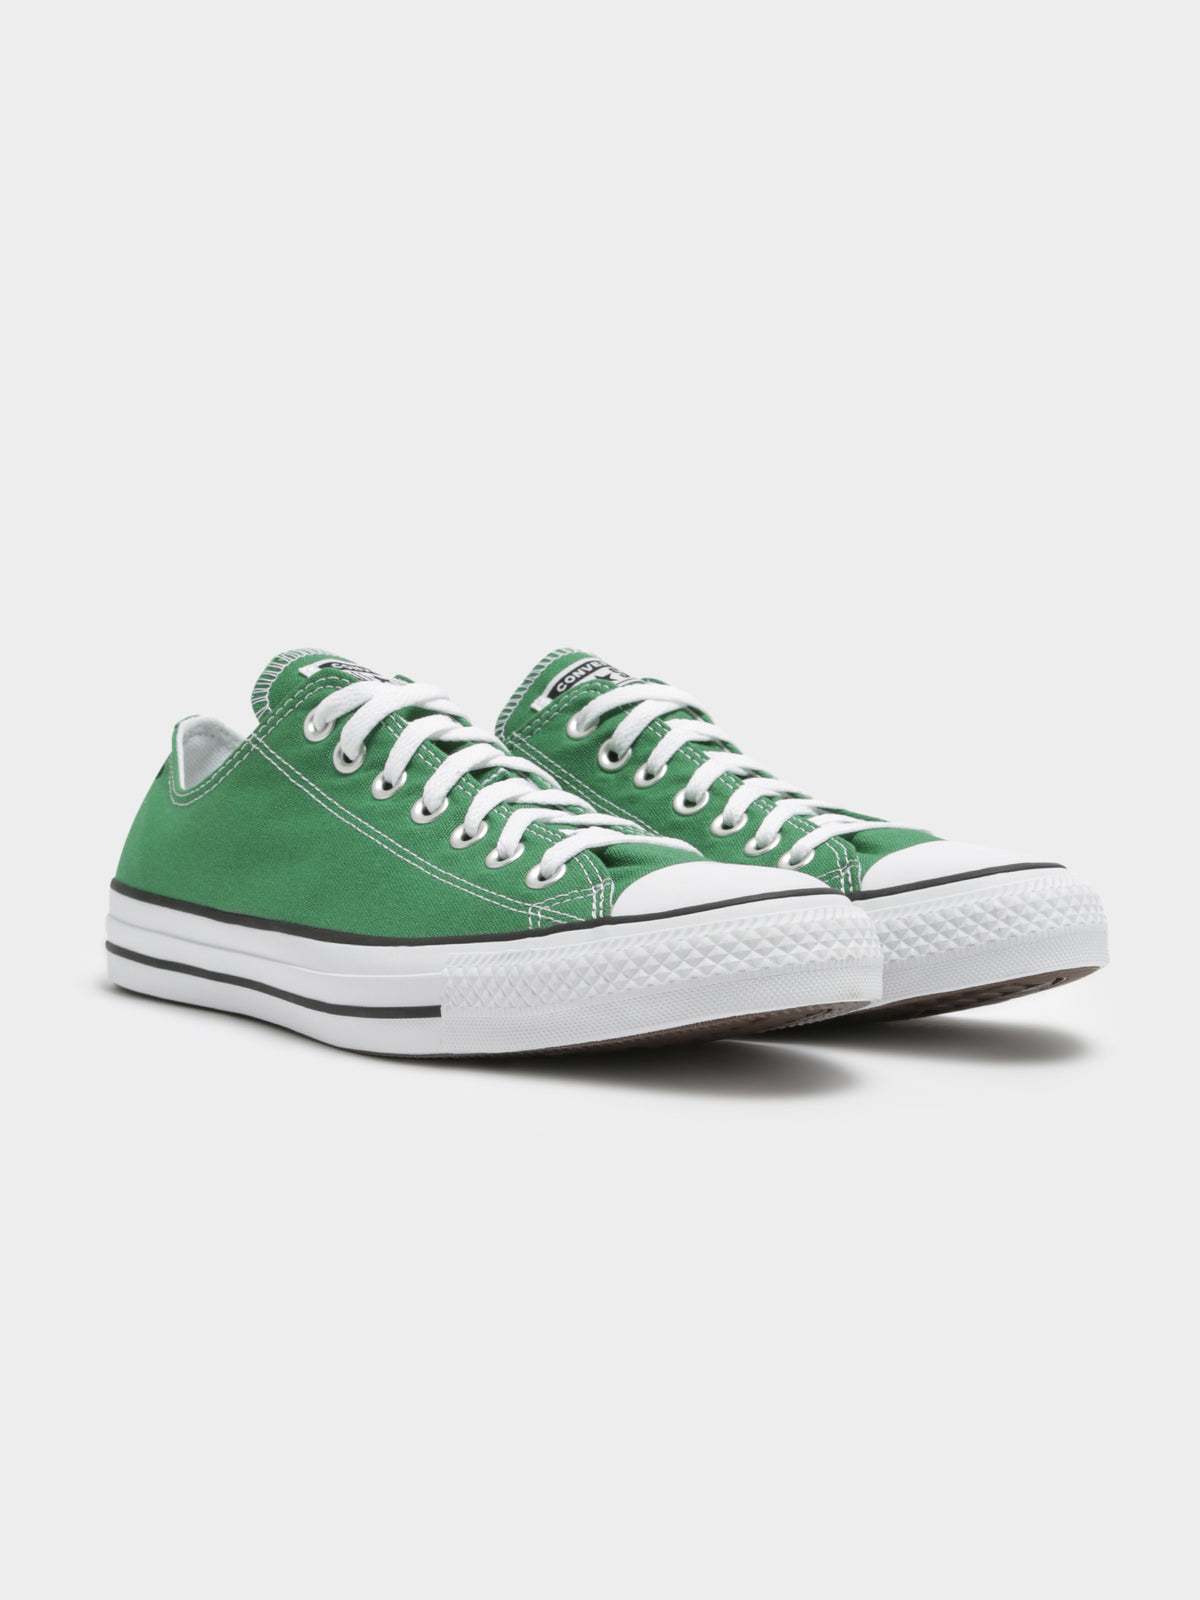 Unisex Chuck Taylor All Star Low Sneakers in Amazon Green